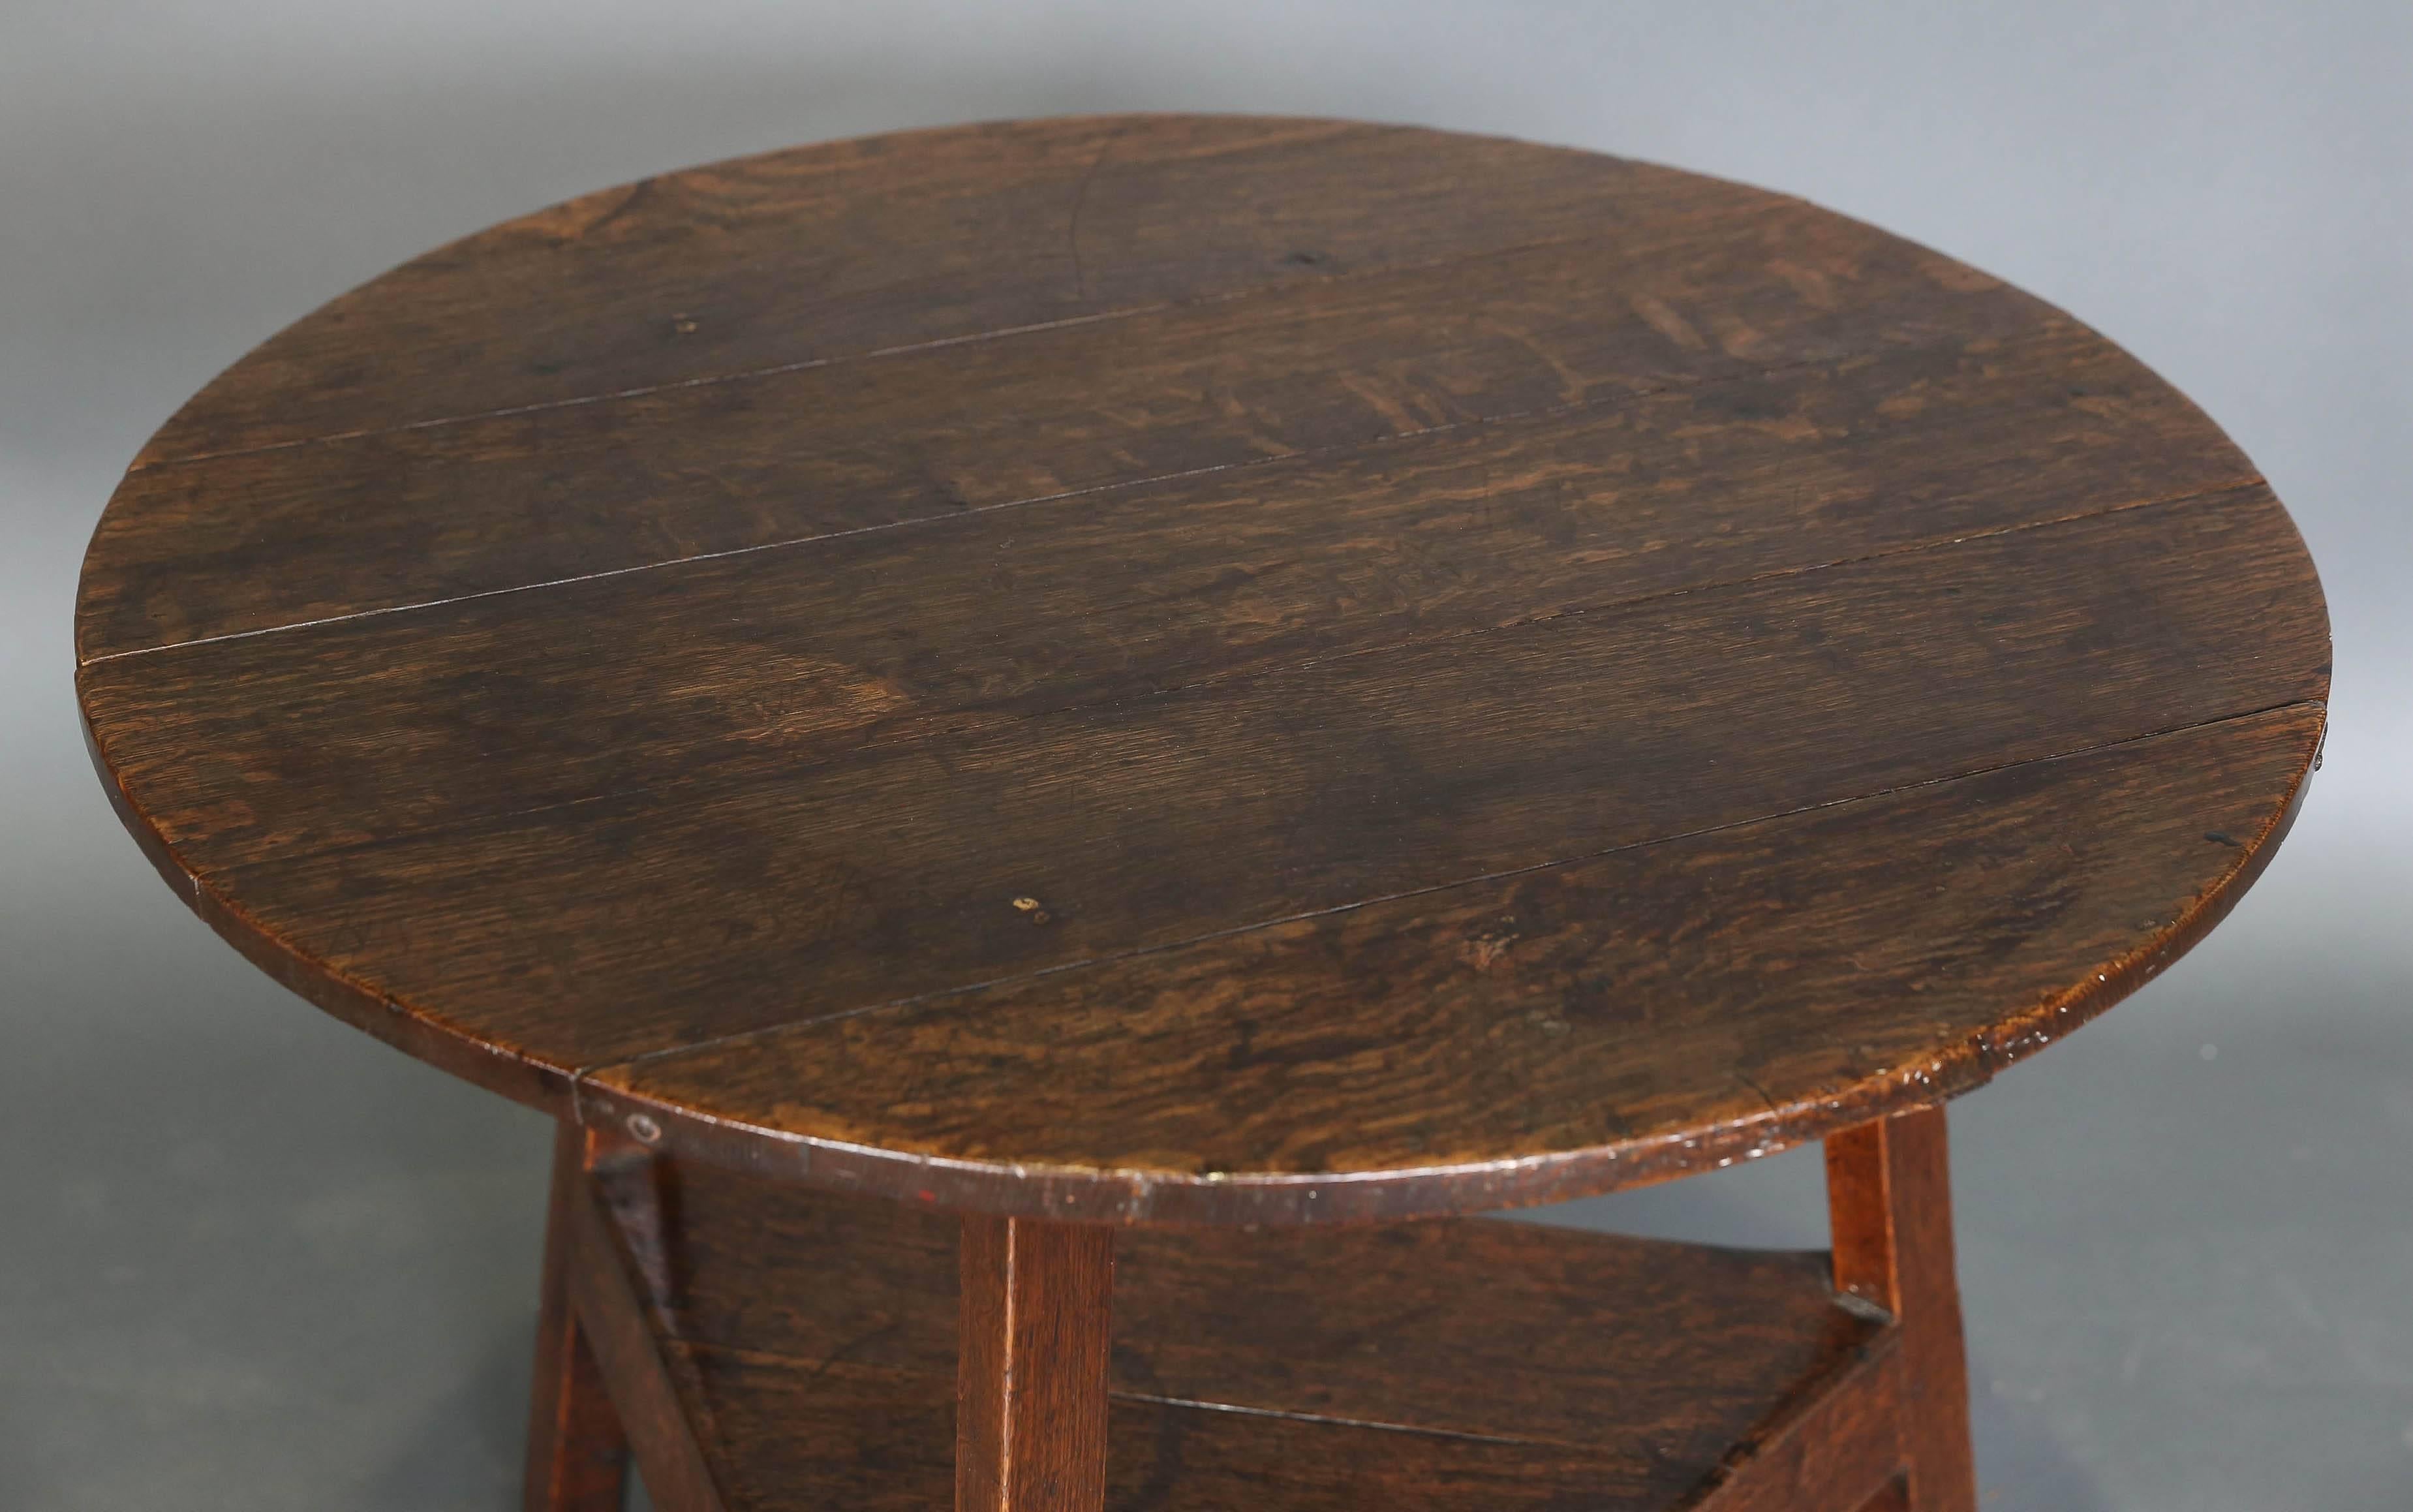 18th century Elm cricket table with shelf with beautiful grain pattern on wood.